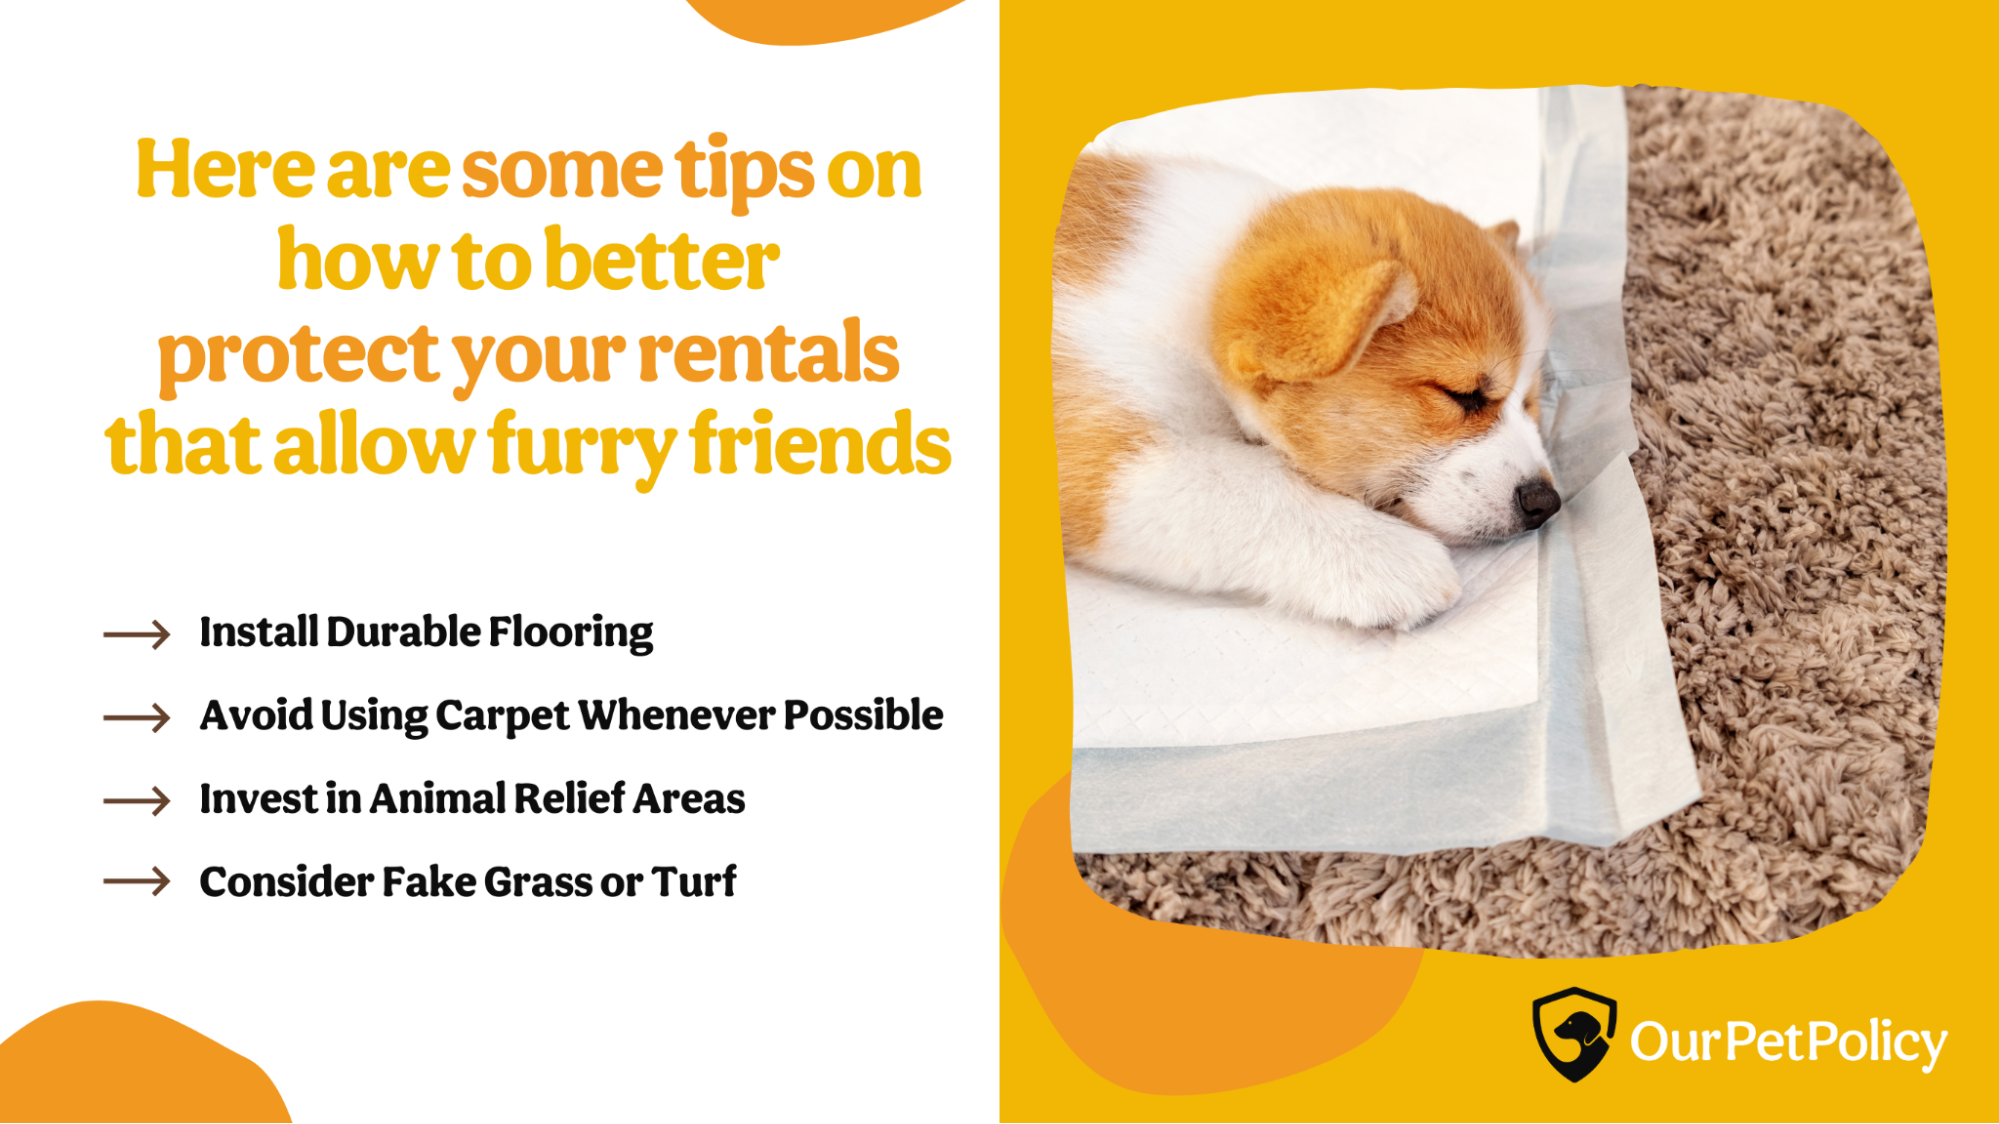 Tips on how to protect pet-friendly rental property